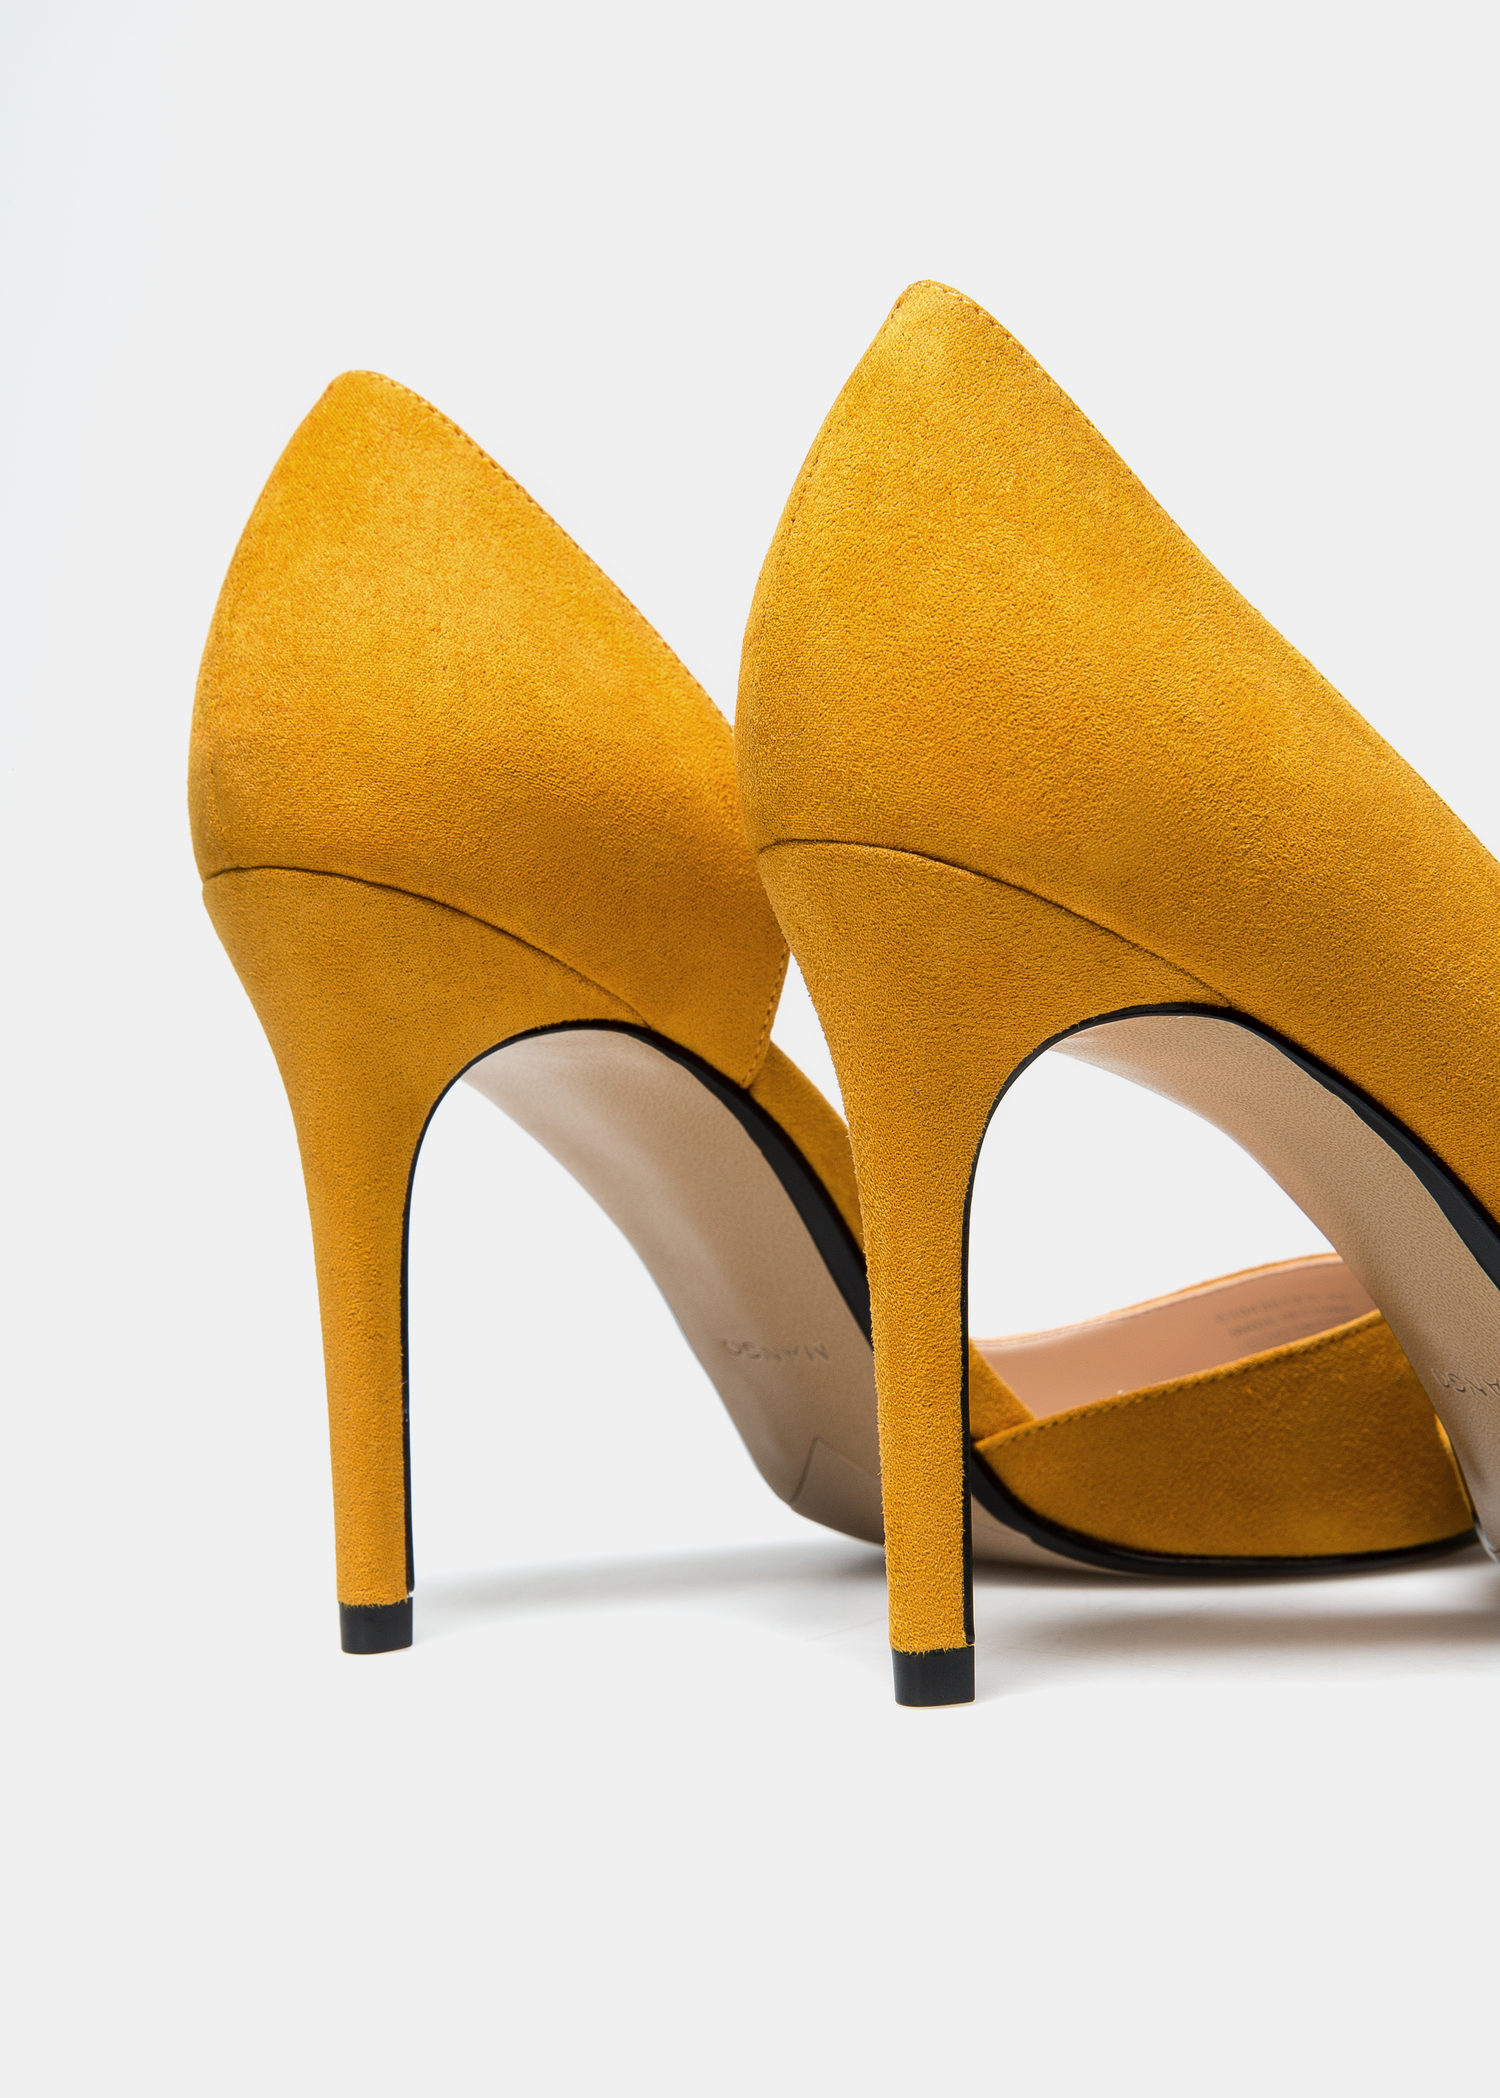 Mango Synthetic Stiletto Shoes in Mustard (Yellow) - Lyst